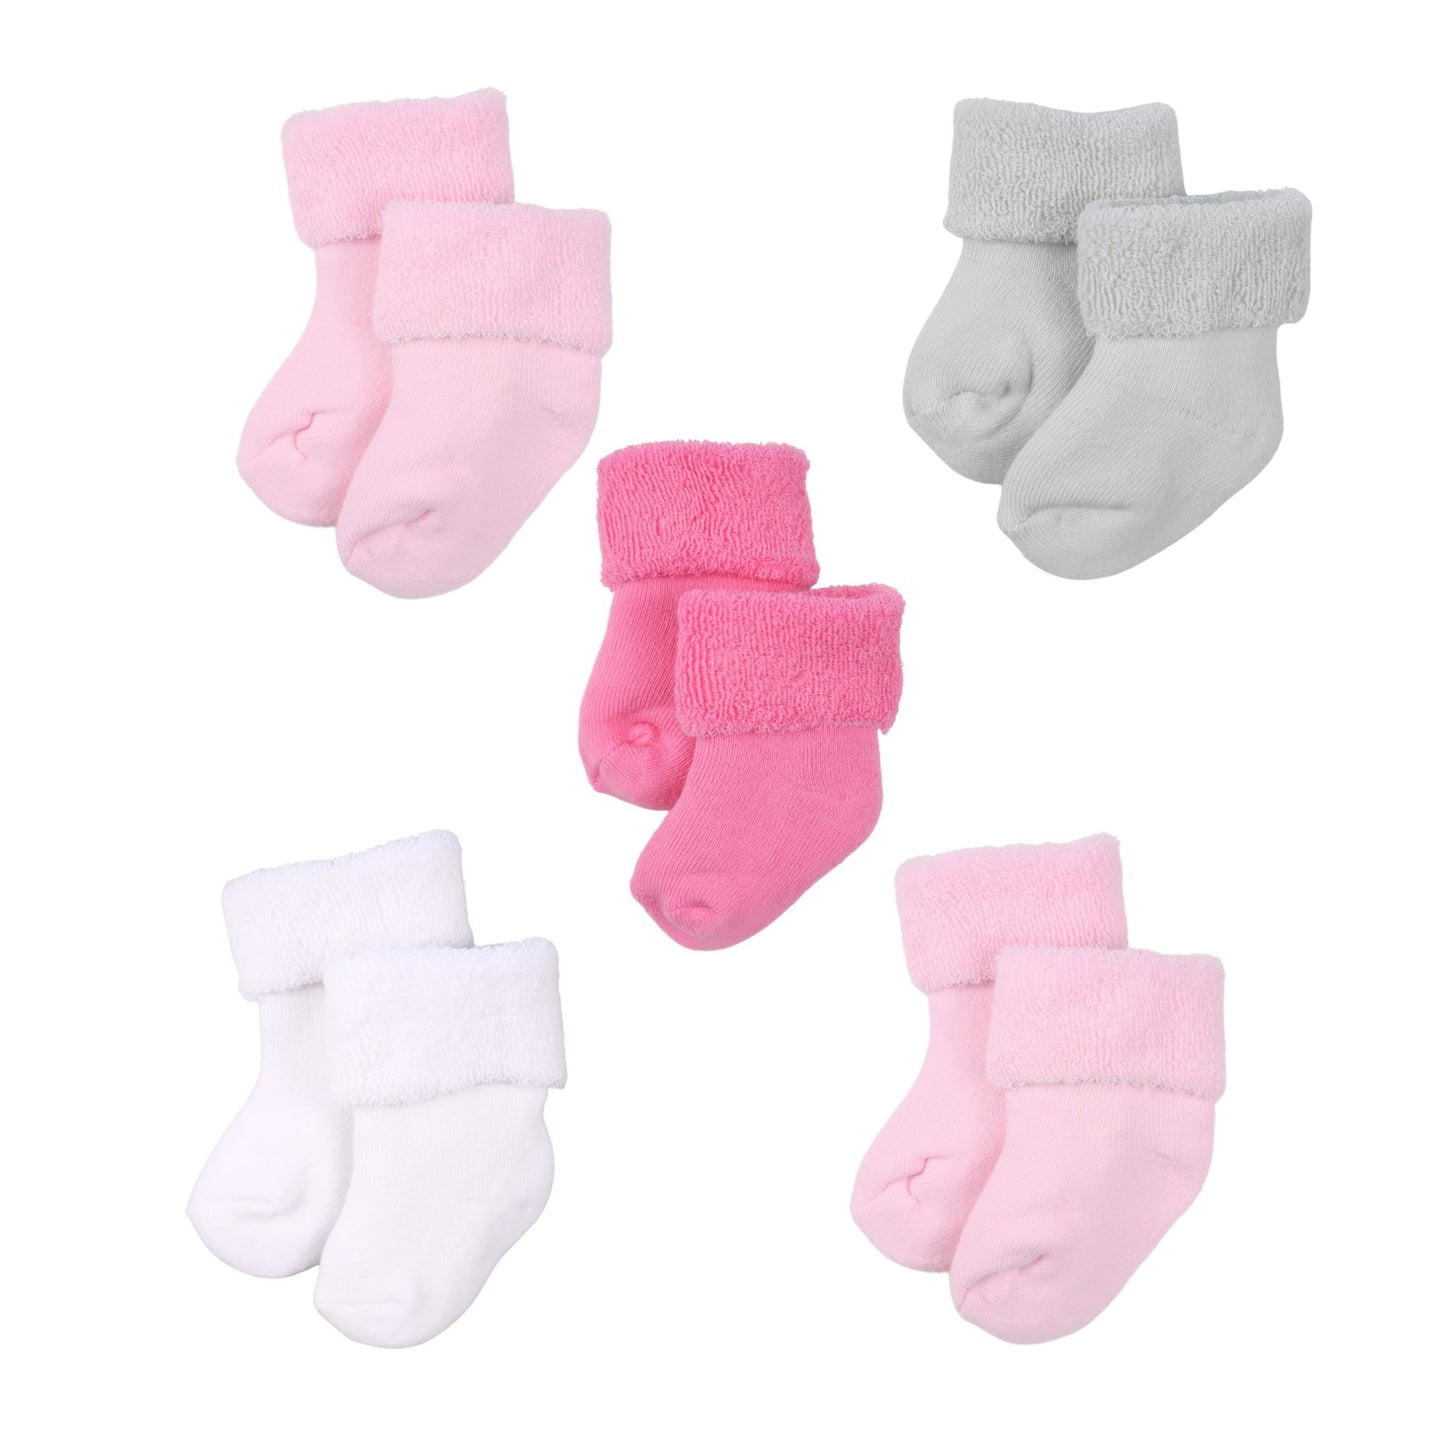 baby blossom knit baby socks in pink multi